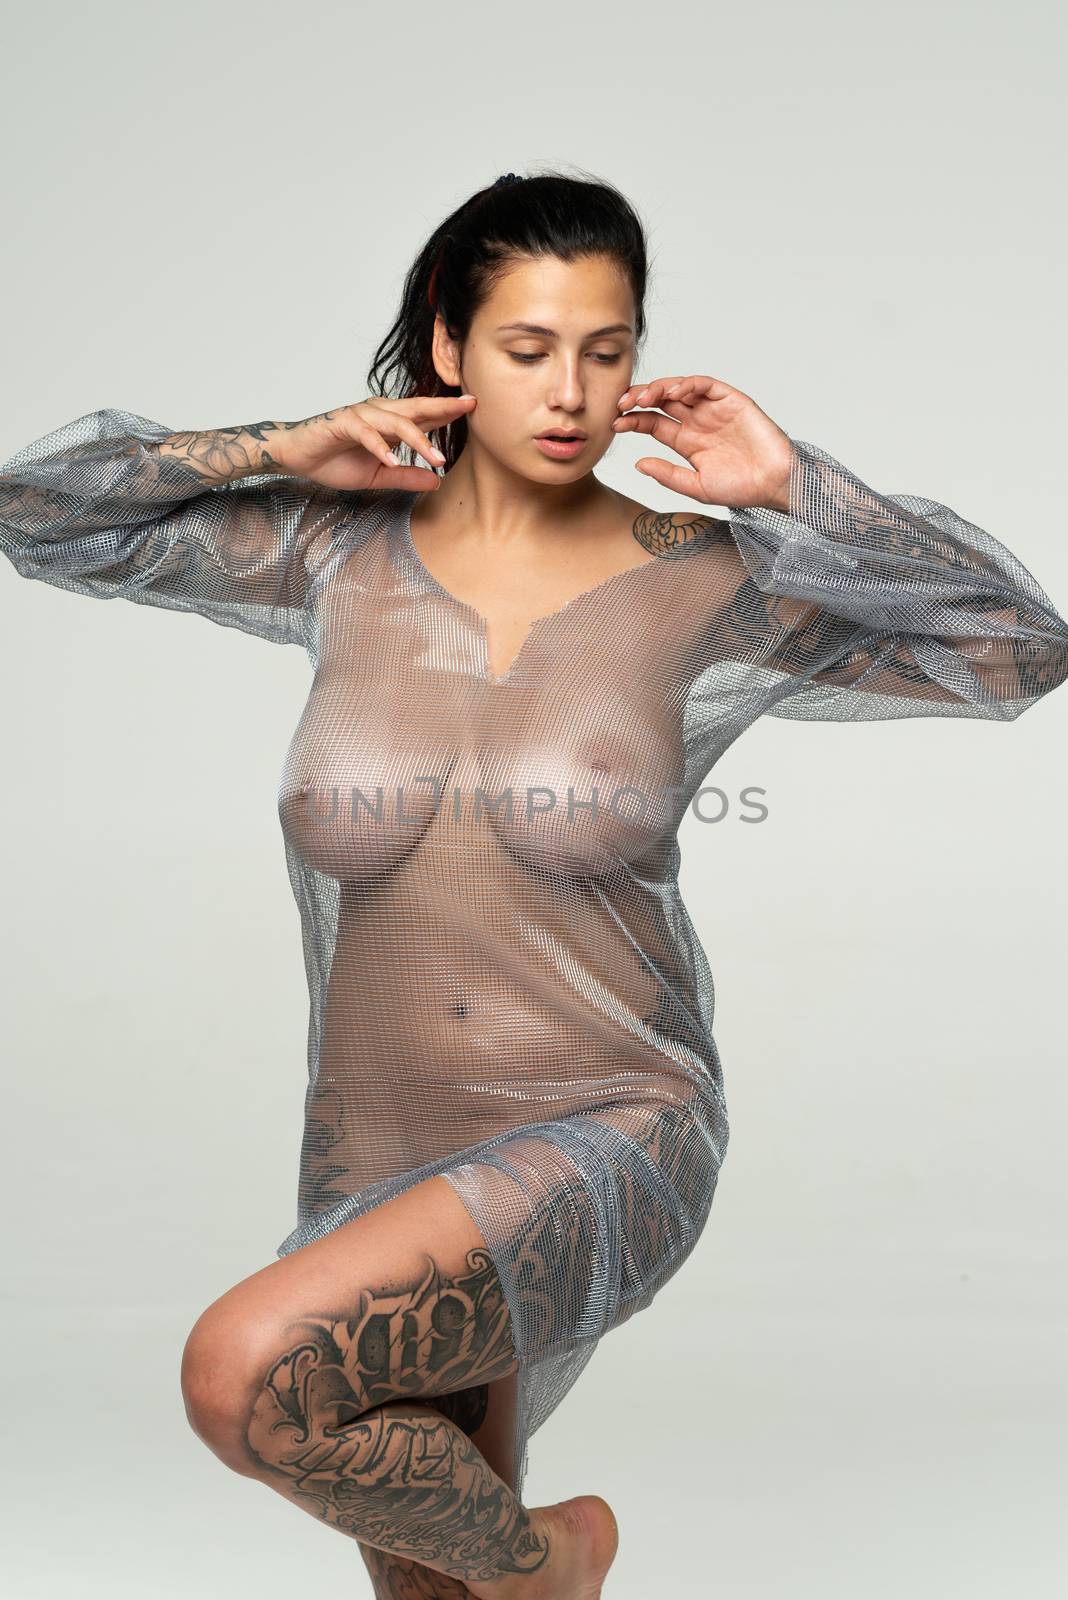 young beautiful girl posing in a transparent dress in the studio